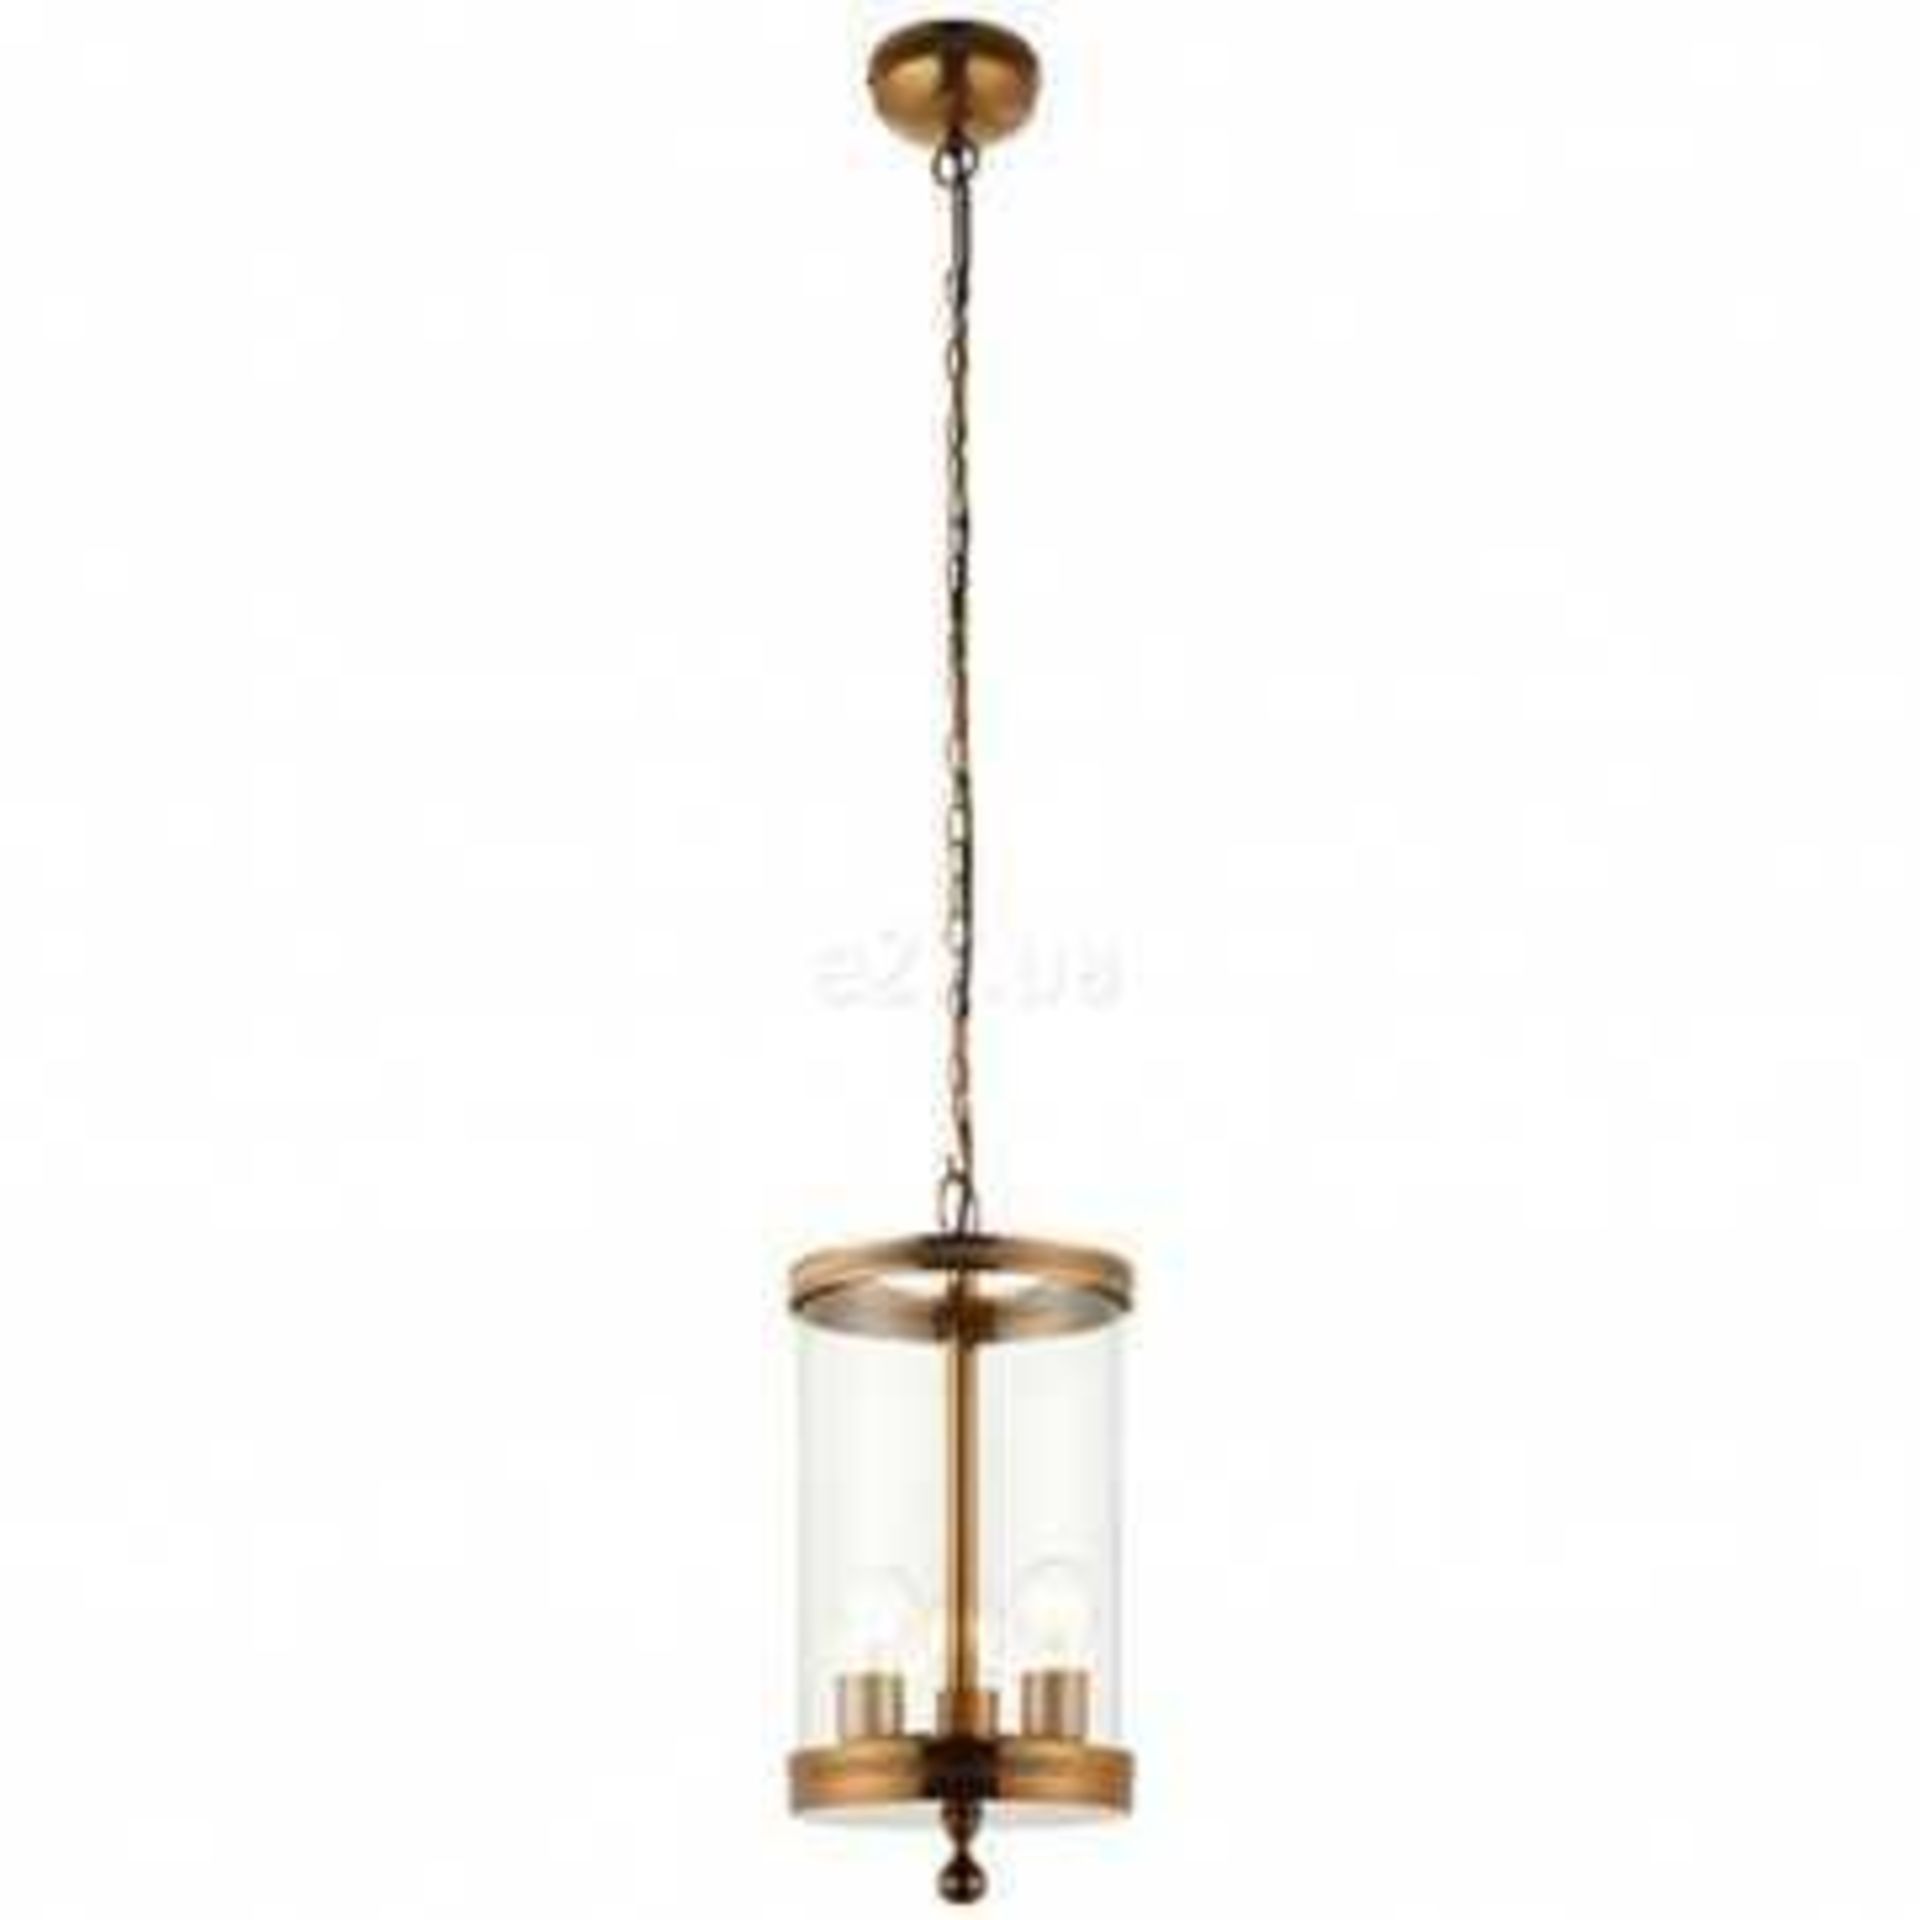 Rrp £120 Boxed Endon Lighting Antique Brass And Glass Cylinder 3 Light Ceiling Light Fitting